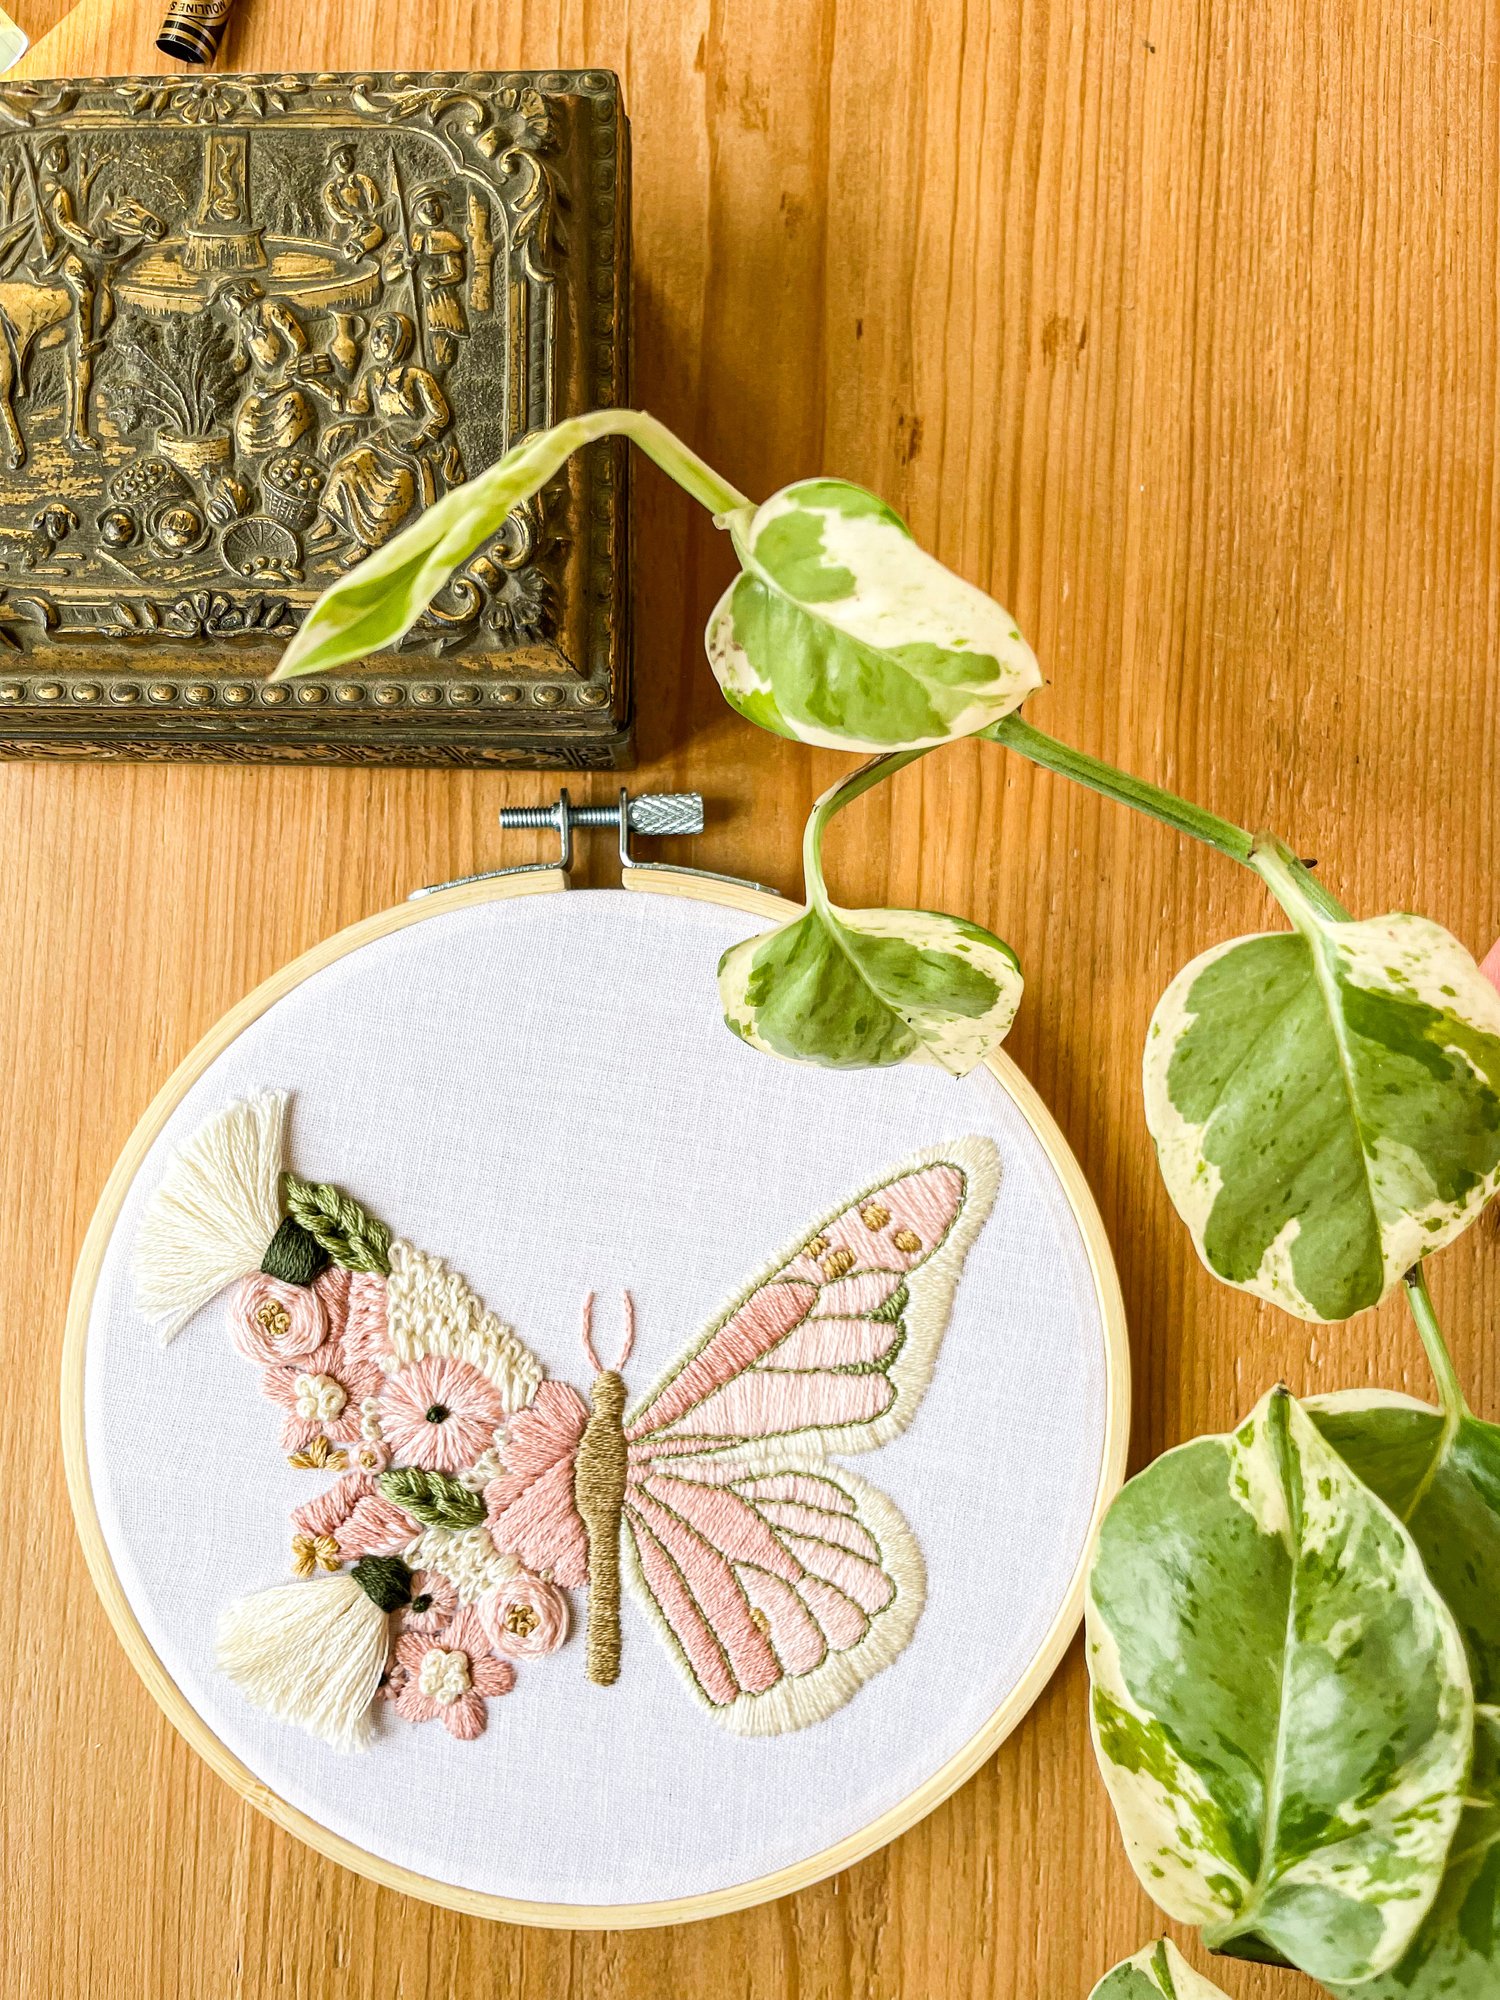 Butterflies Hand Embroidery Kit - Stitched Modern